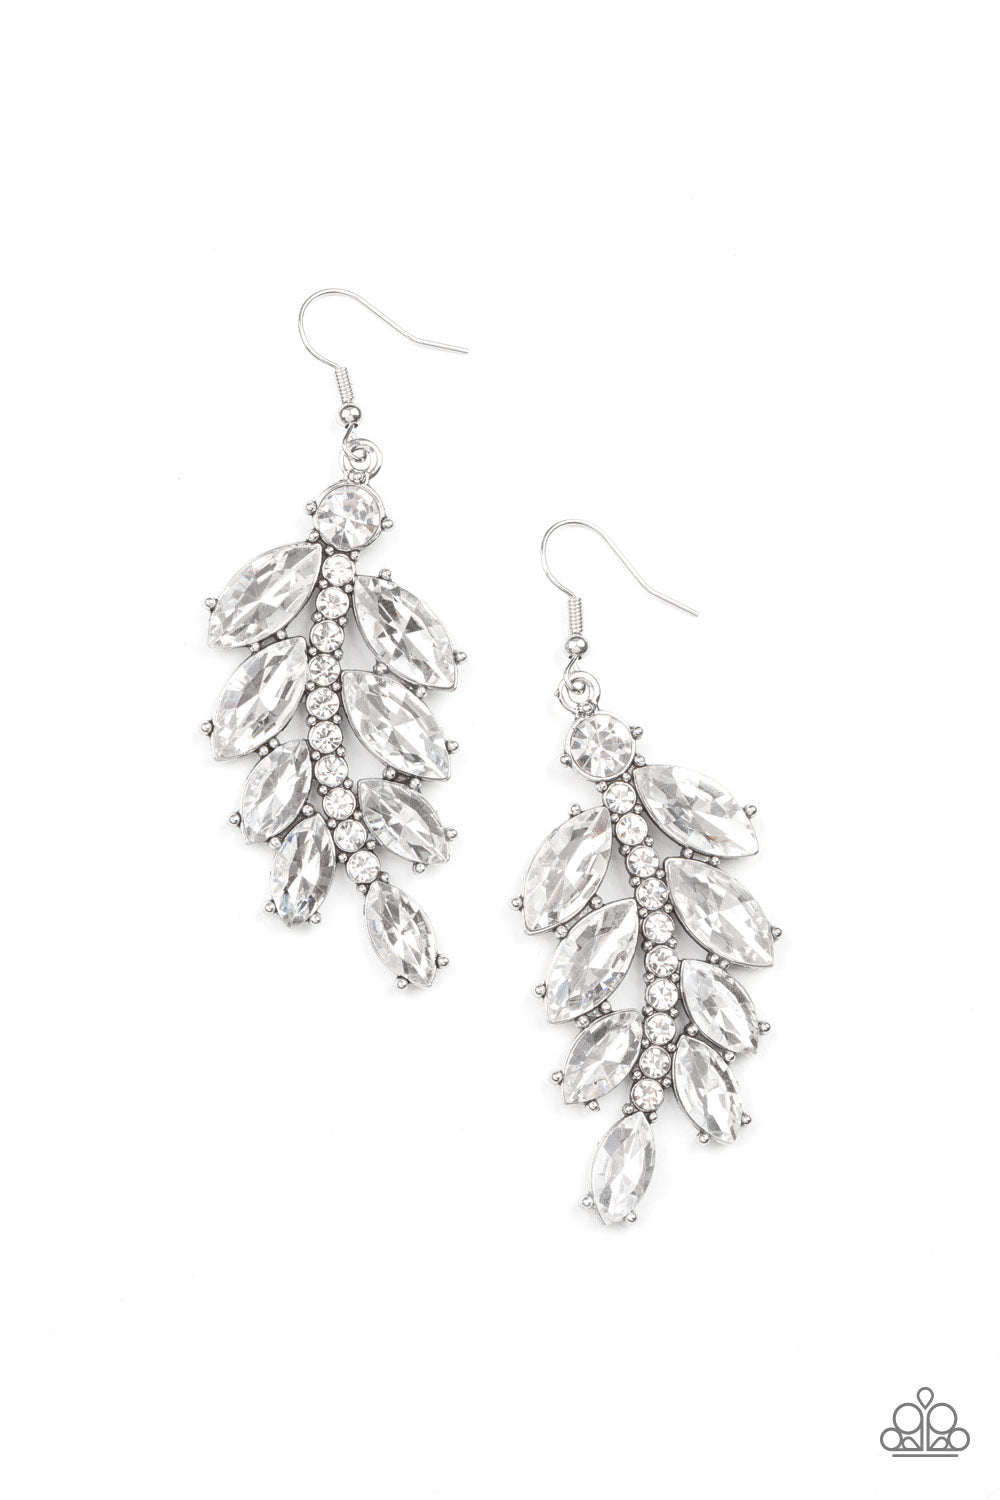 Paparazzi Ice Garden Gala - White Earrings - Jewelry Boutique Earring attaches to a standard fishhook fitting. Sold as one pair of earrings. Paparazzi Accessories are all 100% Lead-Free and Nickel Free. Free Shipping on orders over $75